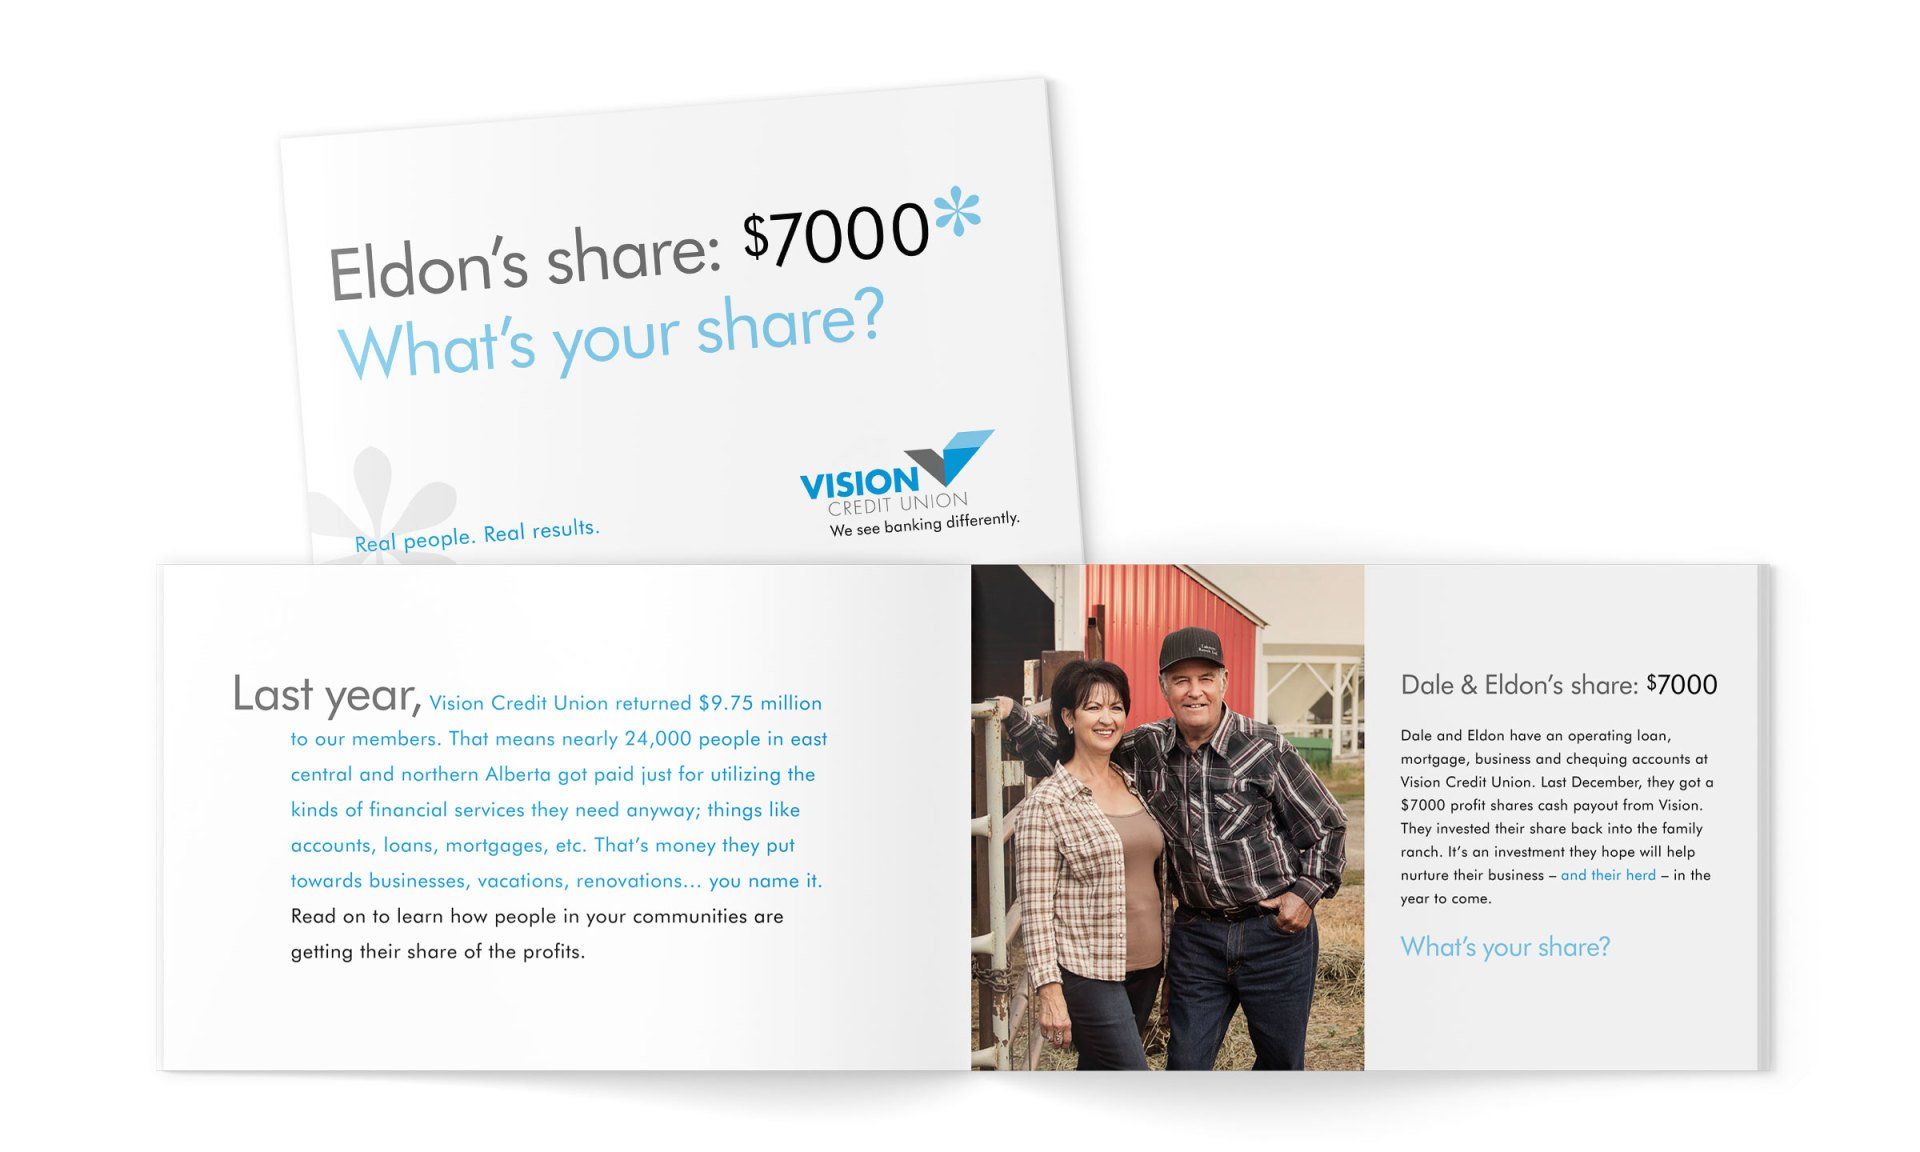 DIRECT MAIL CAMPAIGN PRODUCED FOR VISION CREDIT UNION BY IVY DESIGN INC